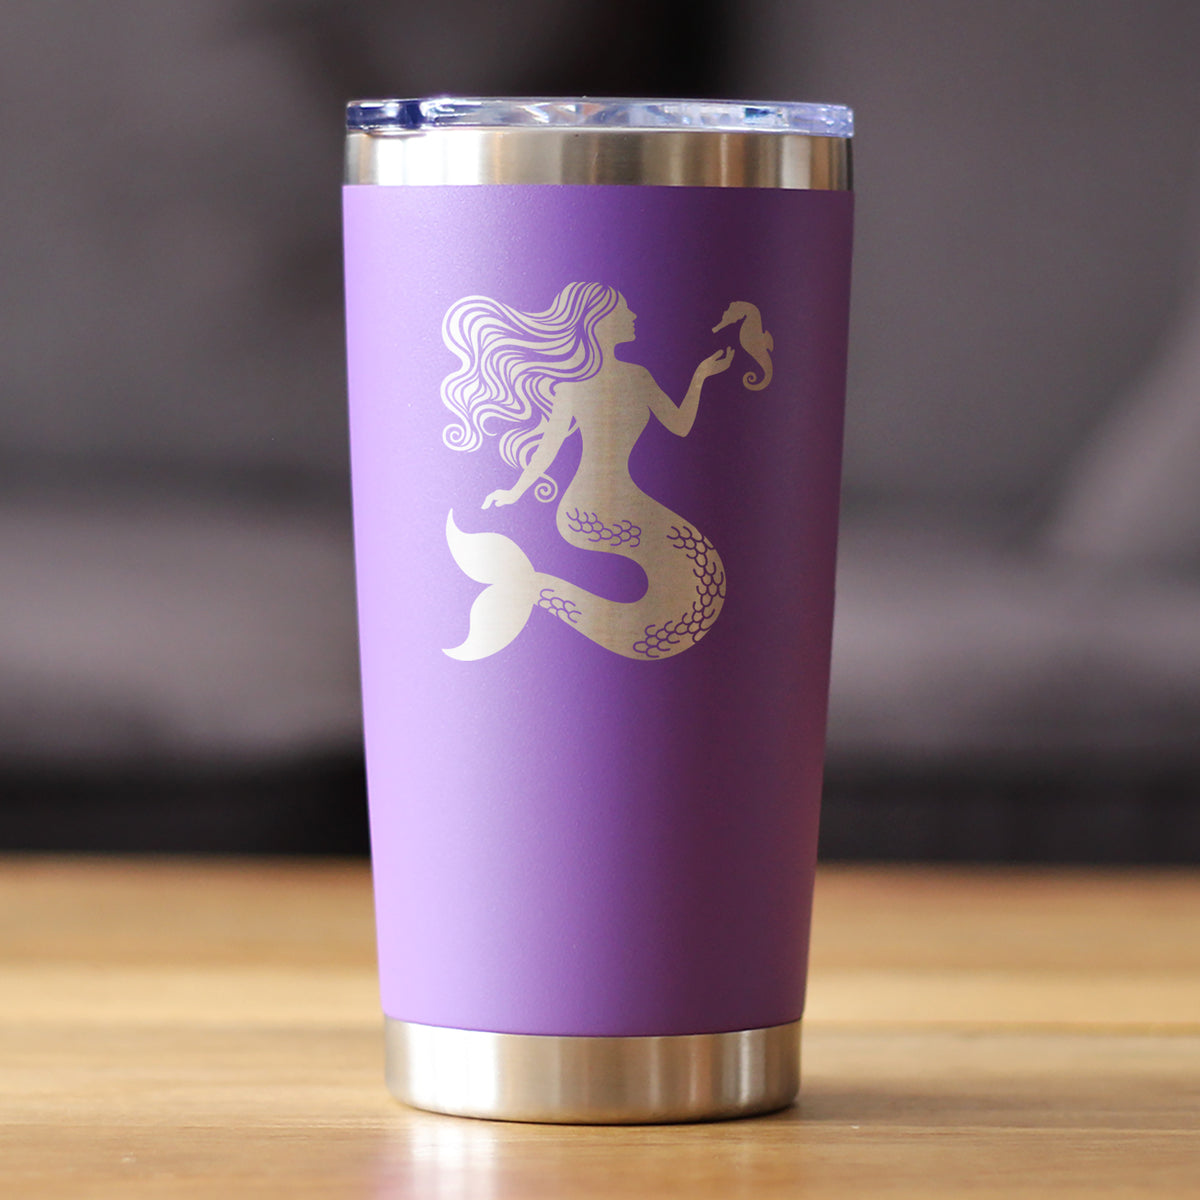 Mermaid - Insulated Coffee Tumbler Cup with Sliding Lid - Stainless Steel Travel Mug - Cute Mermaid Gifts for Women